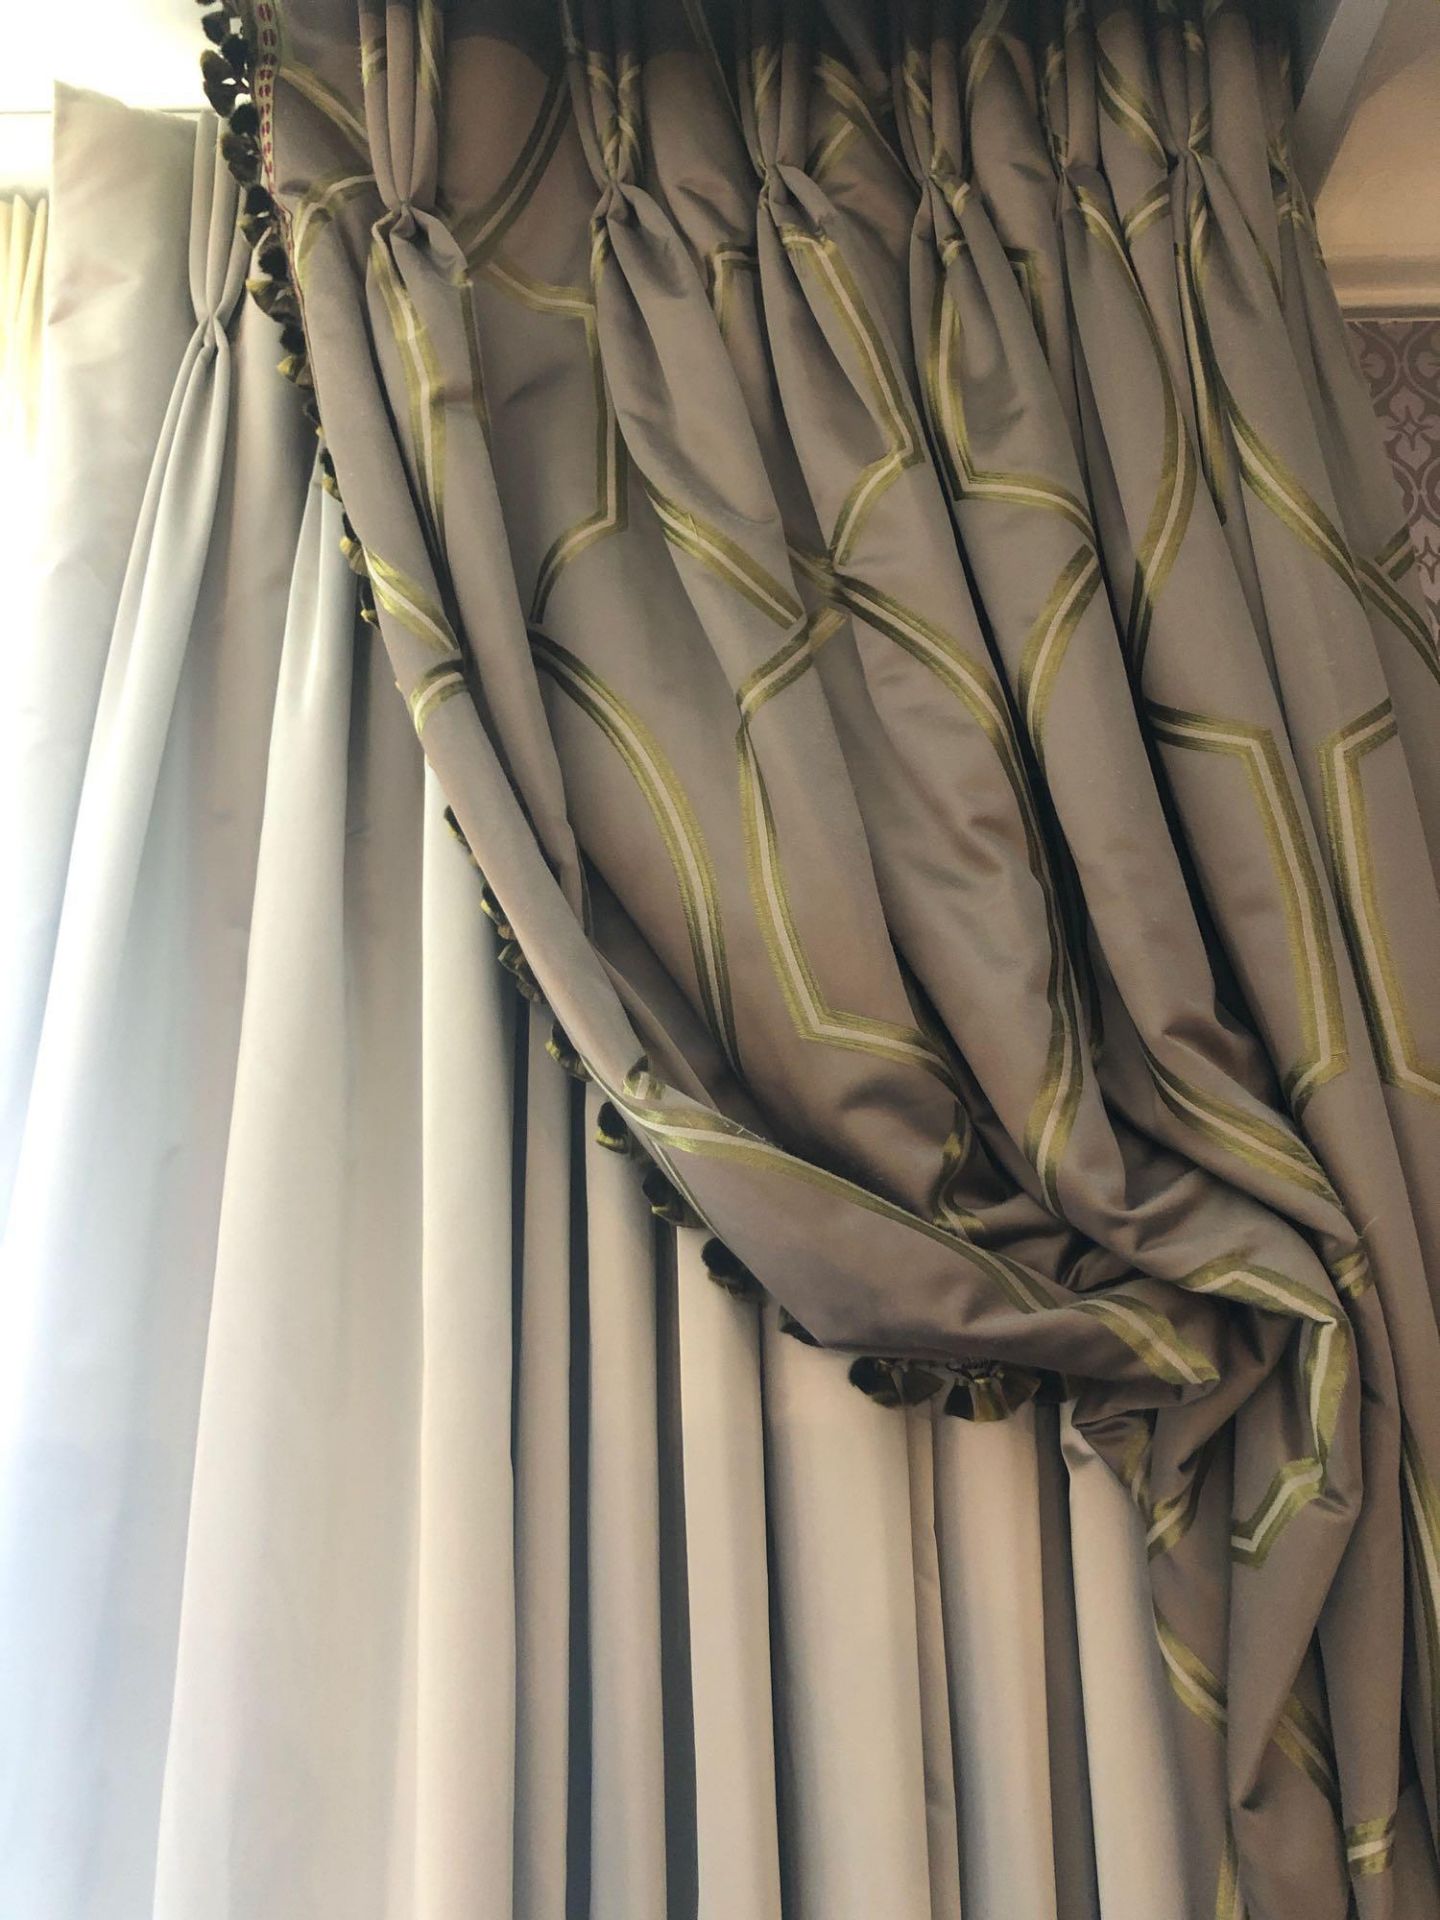 A Pair Of Silk Drapes And Jabots In Gold And Green Patterned 265 x 235cm (Room 527) - Bild 2 aus 2